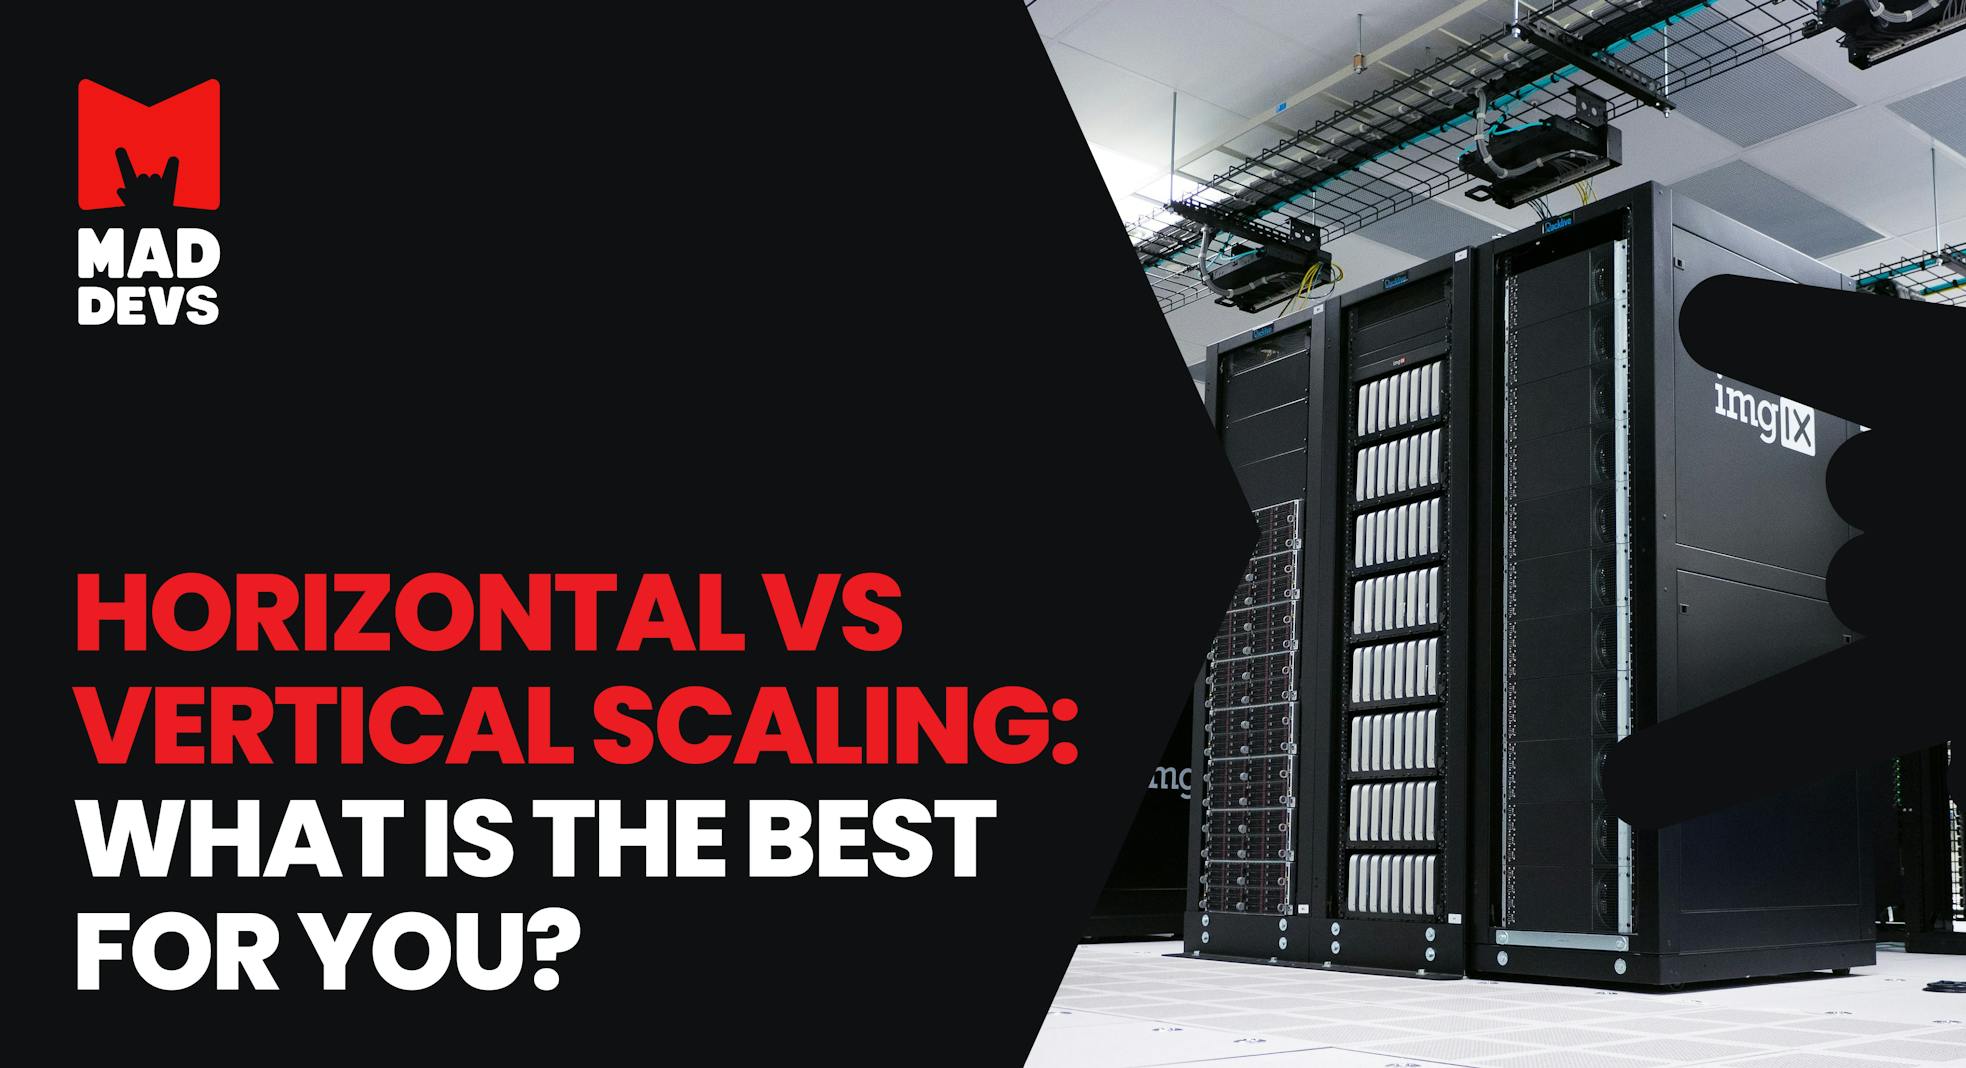 Horizontal vs Vertical Scaling: What Is the Best for You?